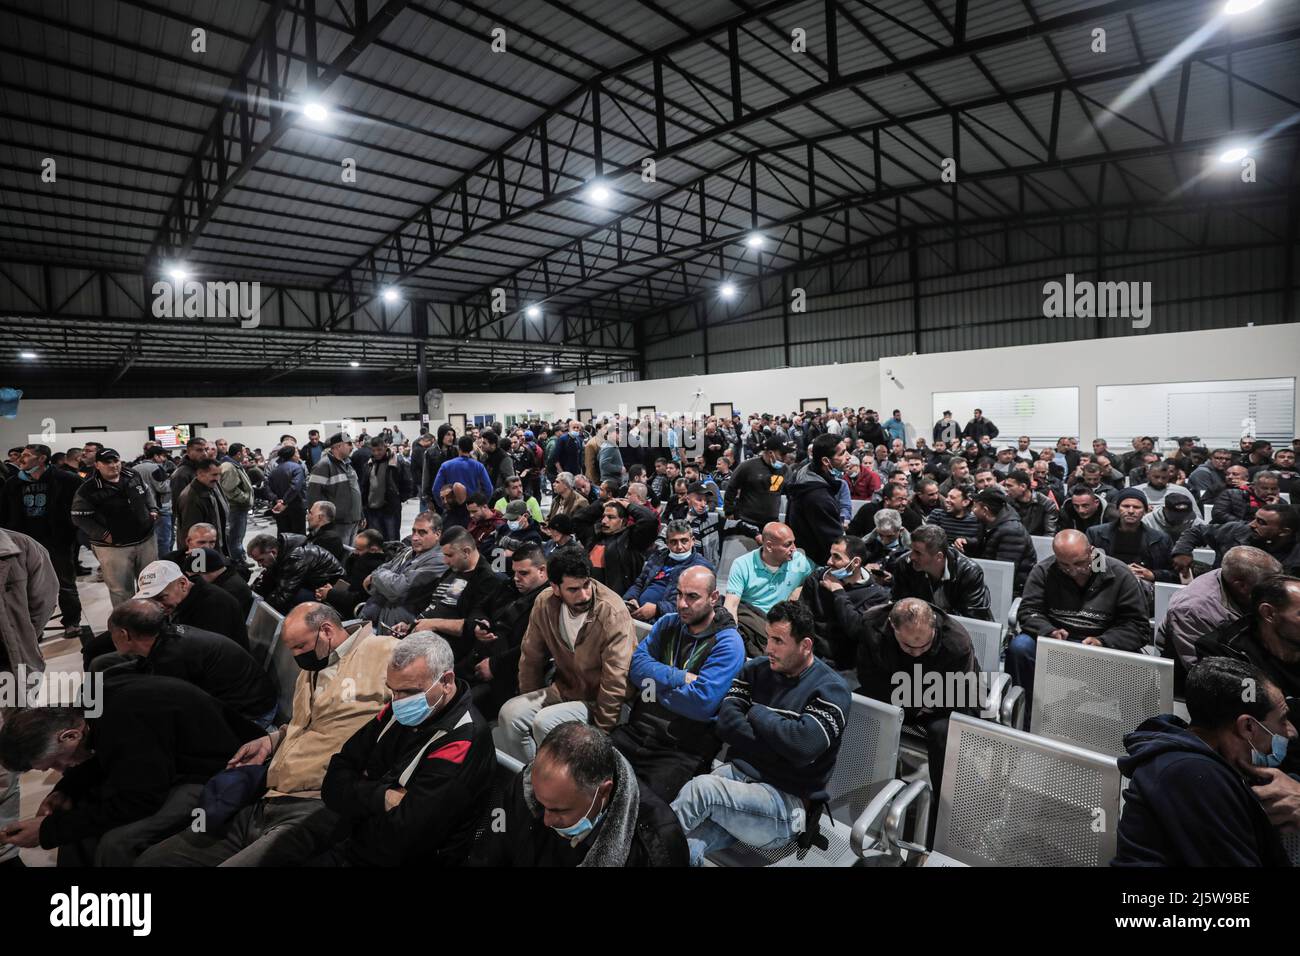 Beit Hanoun, Palestine. 25th Apr, 2022. Palestinian workers wait at the last station in Beit Hanun in the northern Gaza Strip, before reaching Israel through the Erez crossing to work (Photo by Nidal Alwaheidi/SOPA Images/Sipa USA) Credit: Sipa USA/Alamy Live News Stock Photo